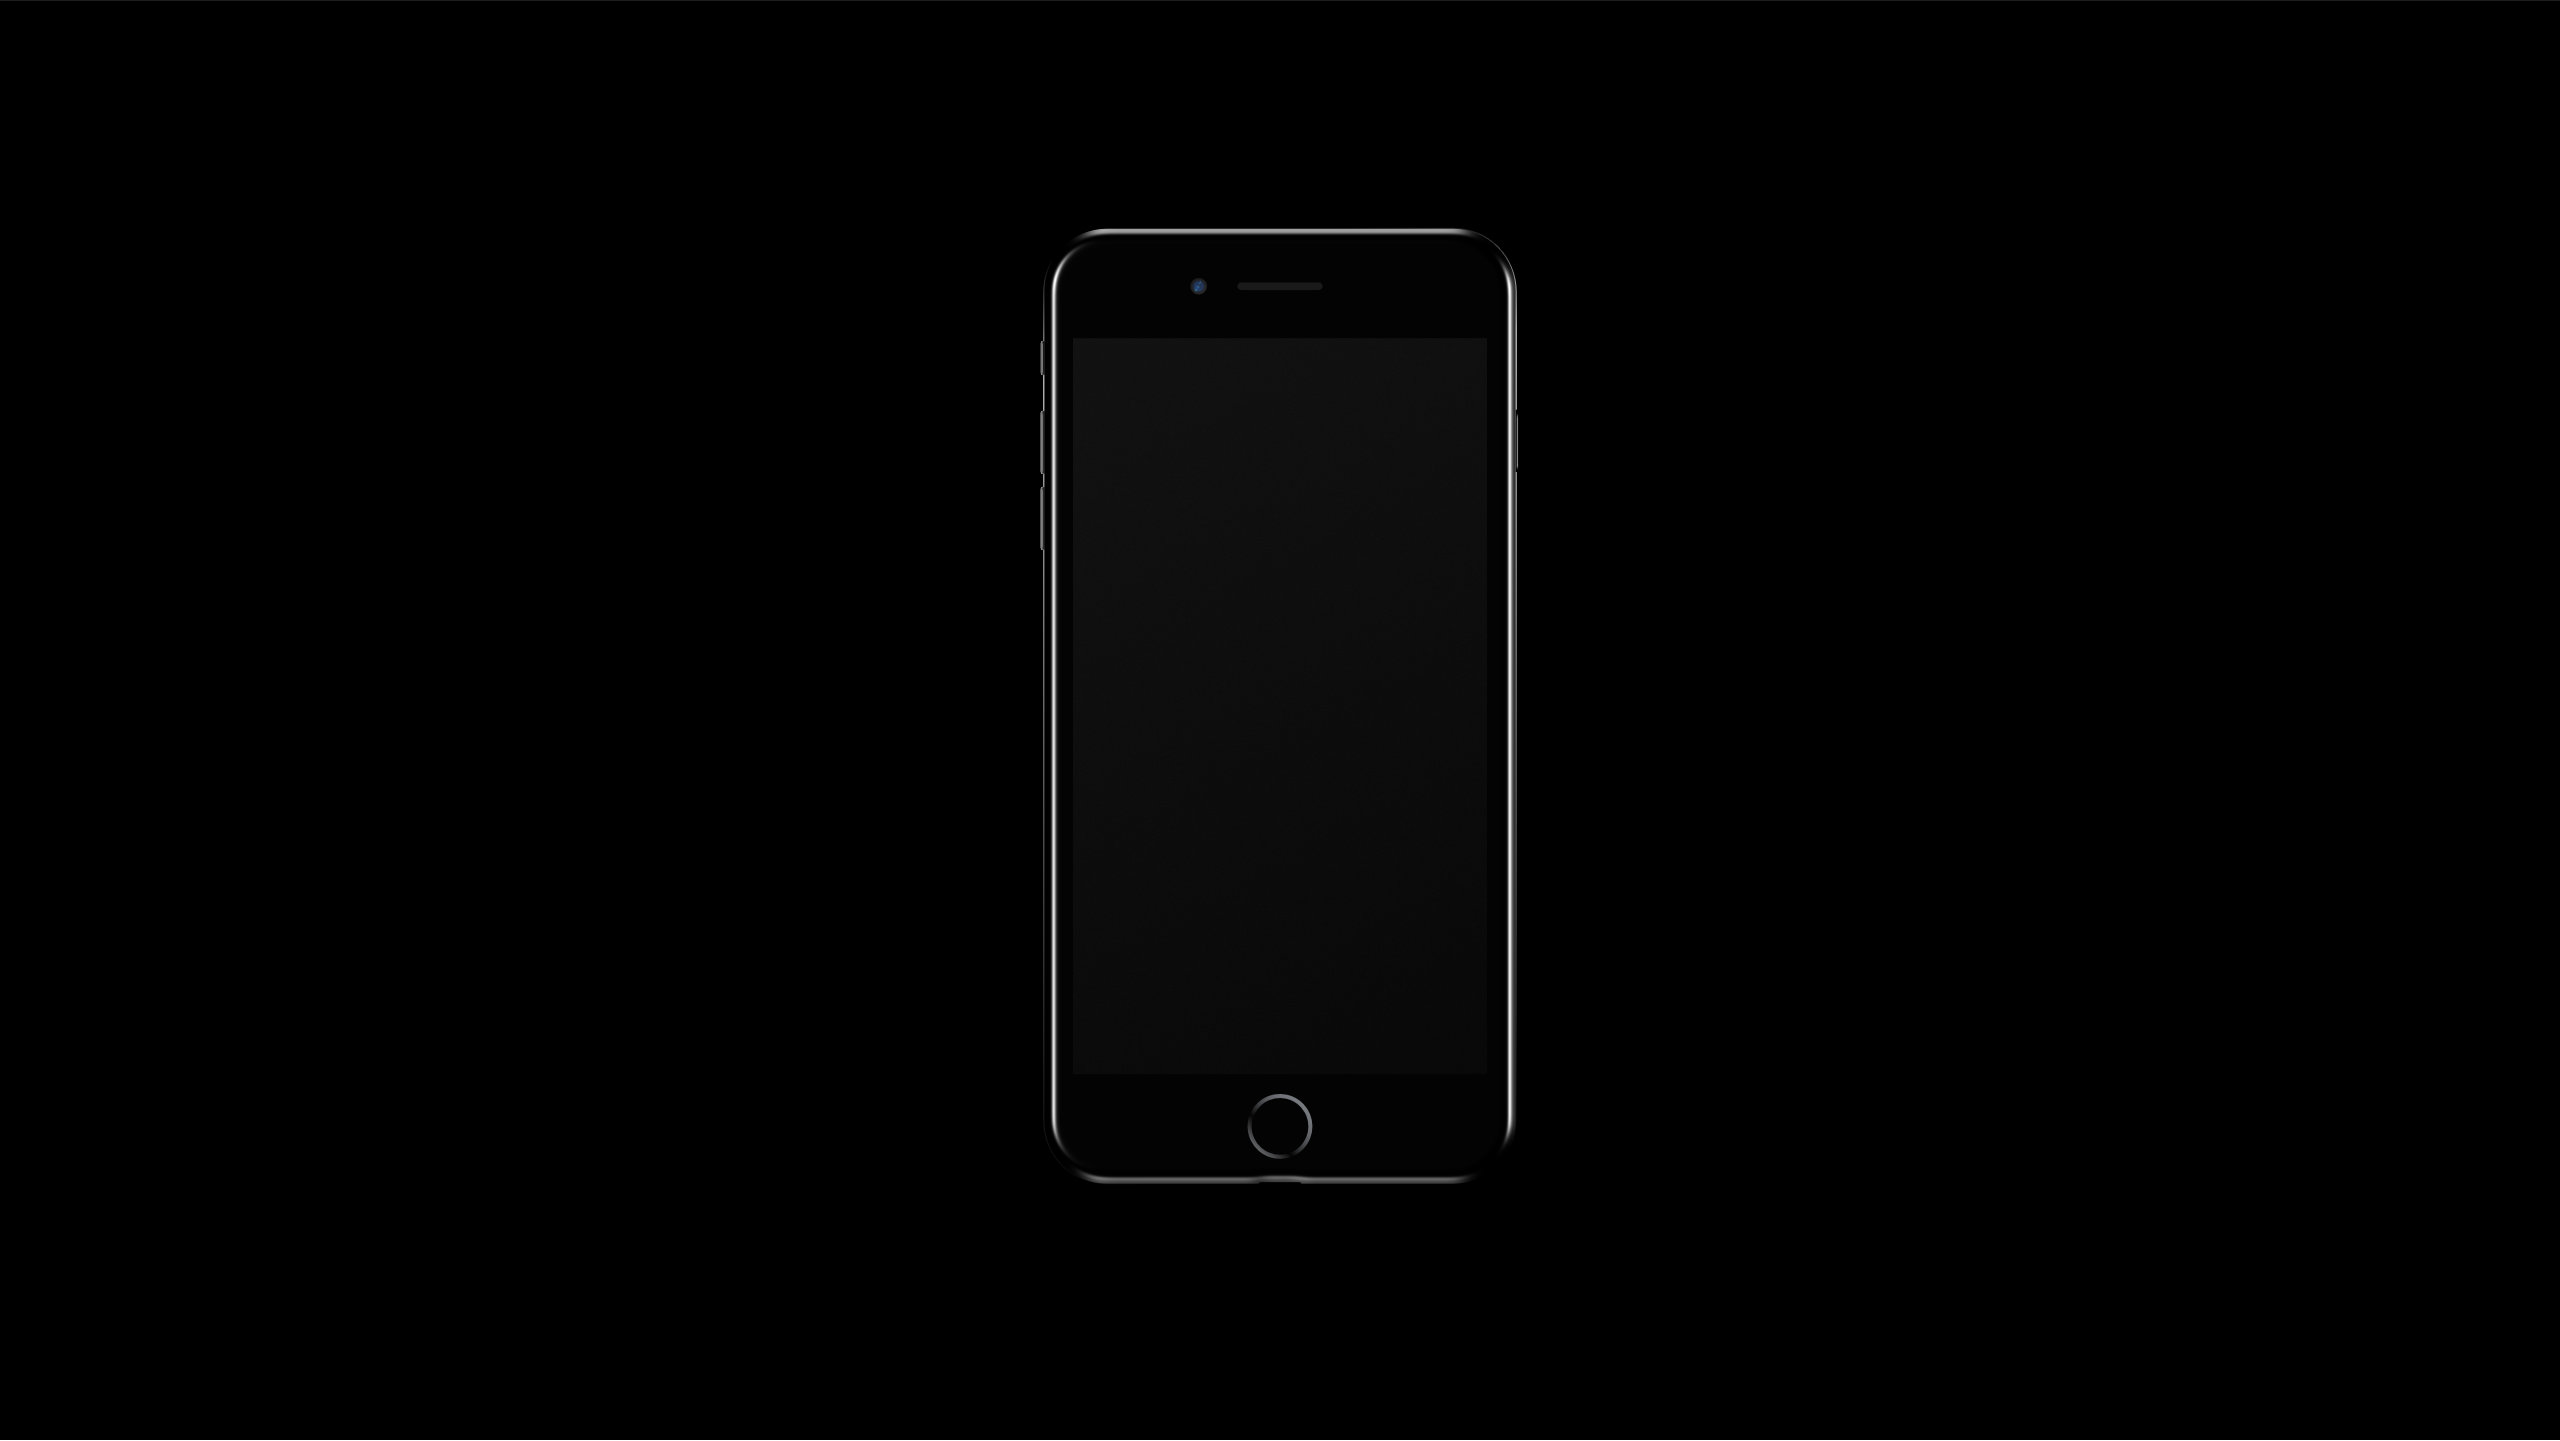 Download iPhone 7 Plus mockup (free) - Resources - Affinity | Forum